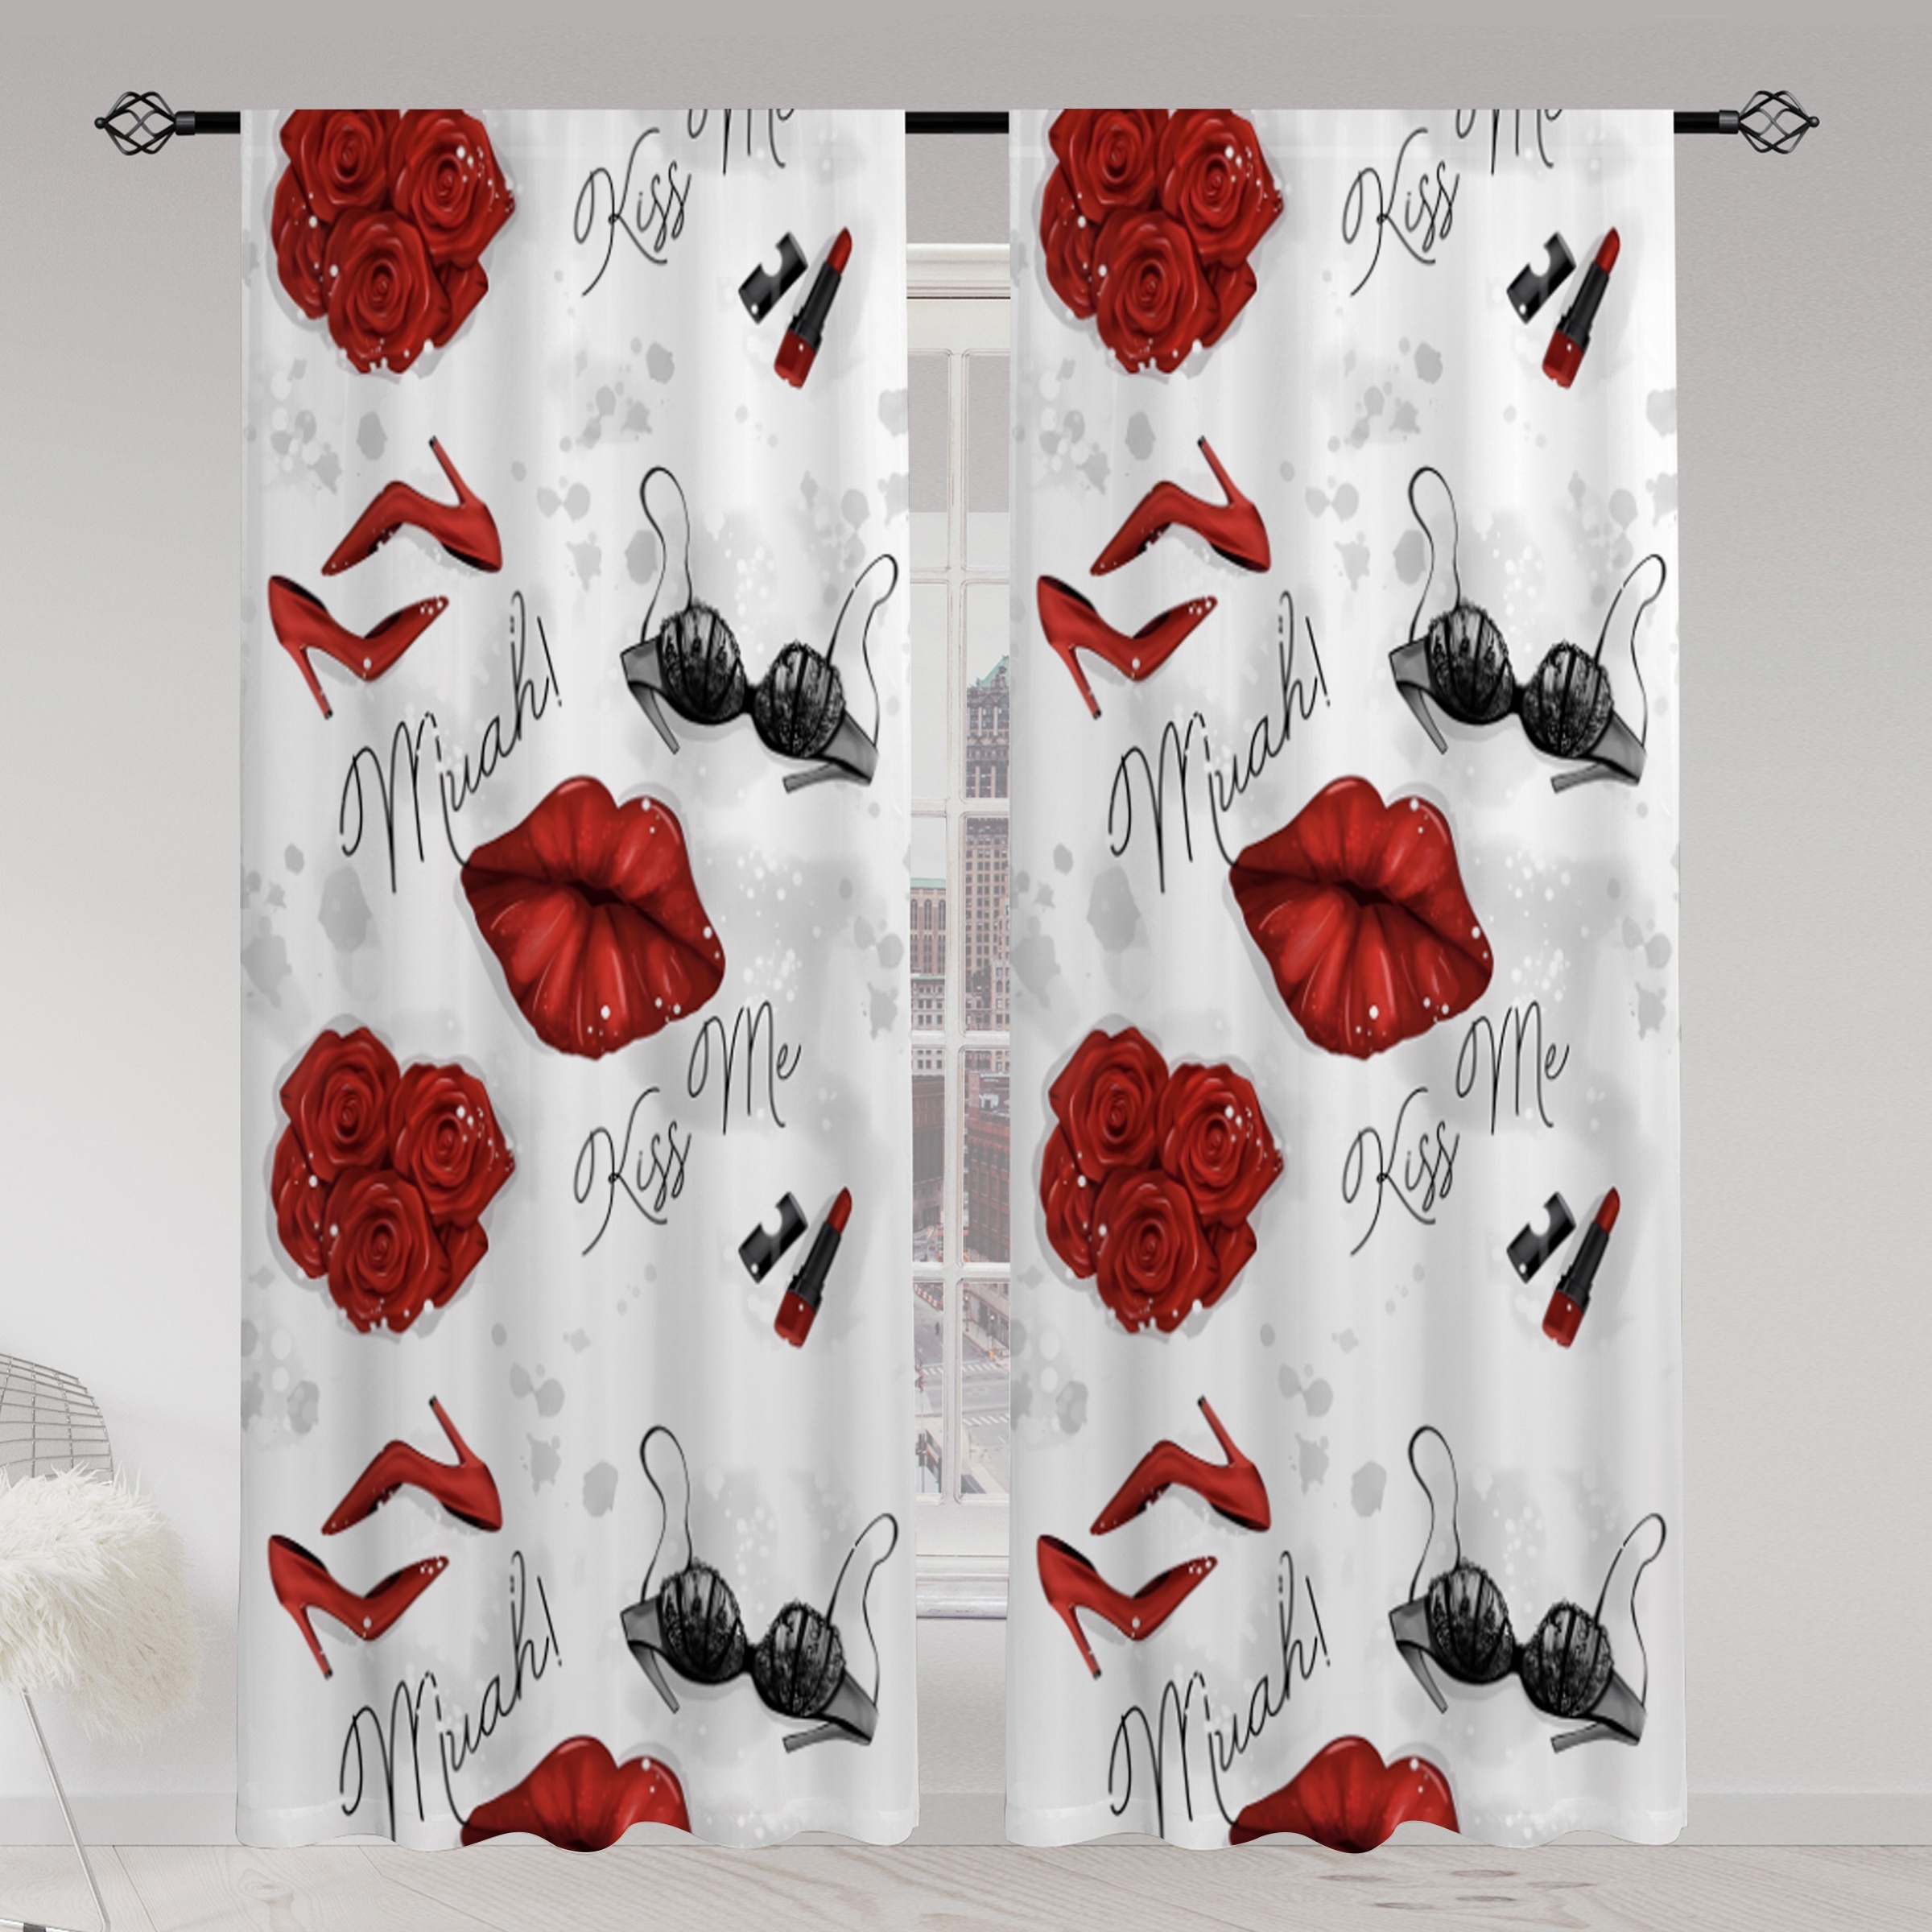 

2pcs Three-dimensional Rose Lips Printed Translucent Curtains, Valentine's Day Living Room Game Room Bedroom Multi-scene Polyester Rod Pocket Decorative Curtains Home Decor Party Supplies